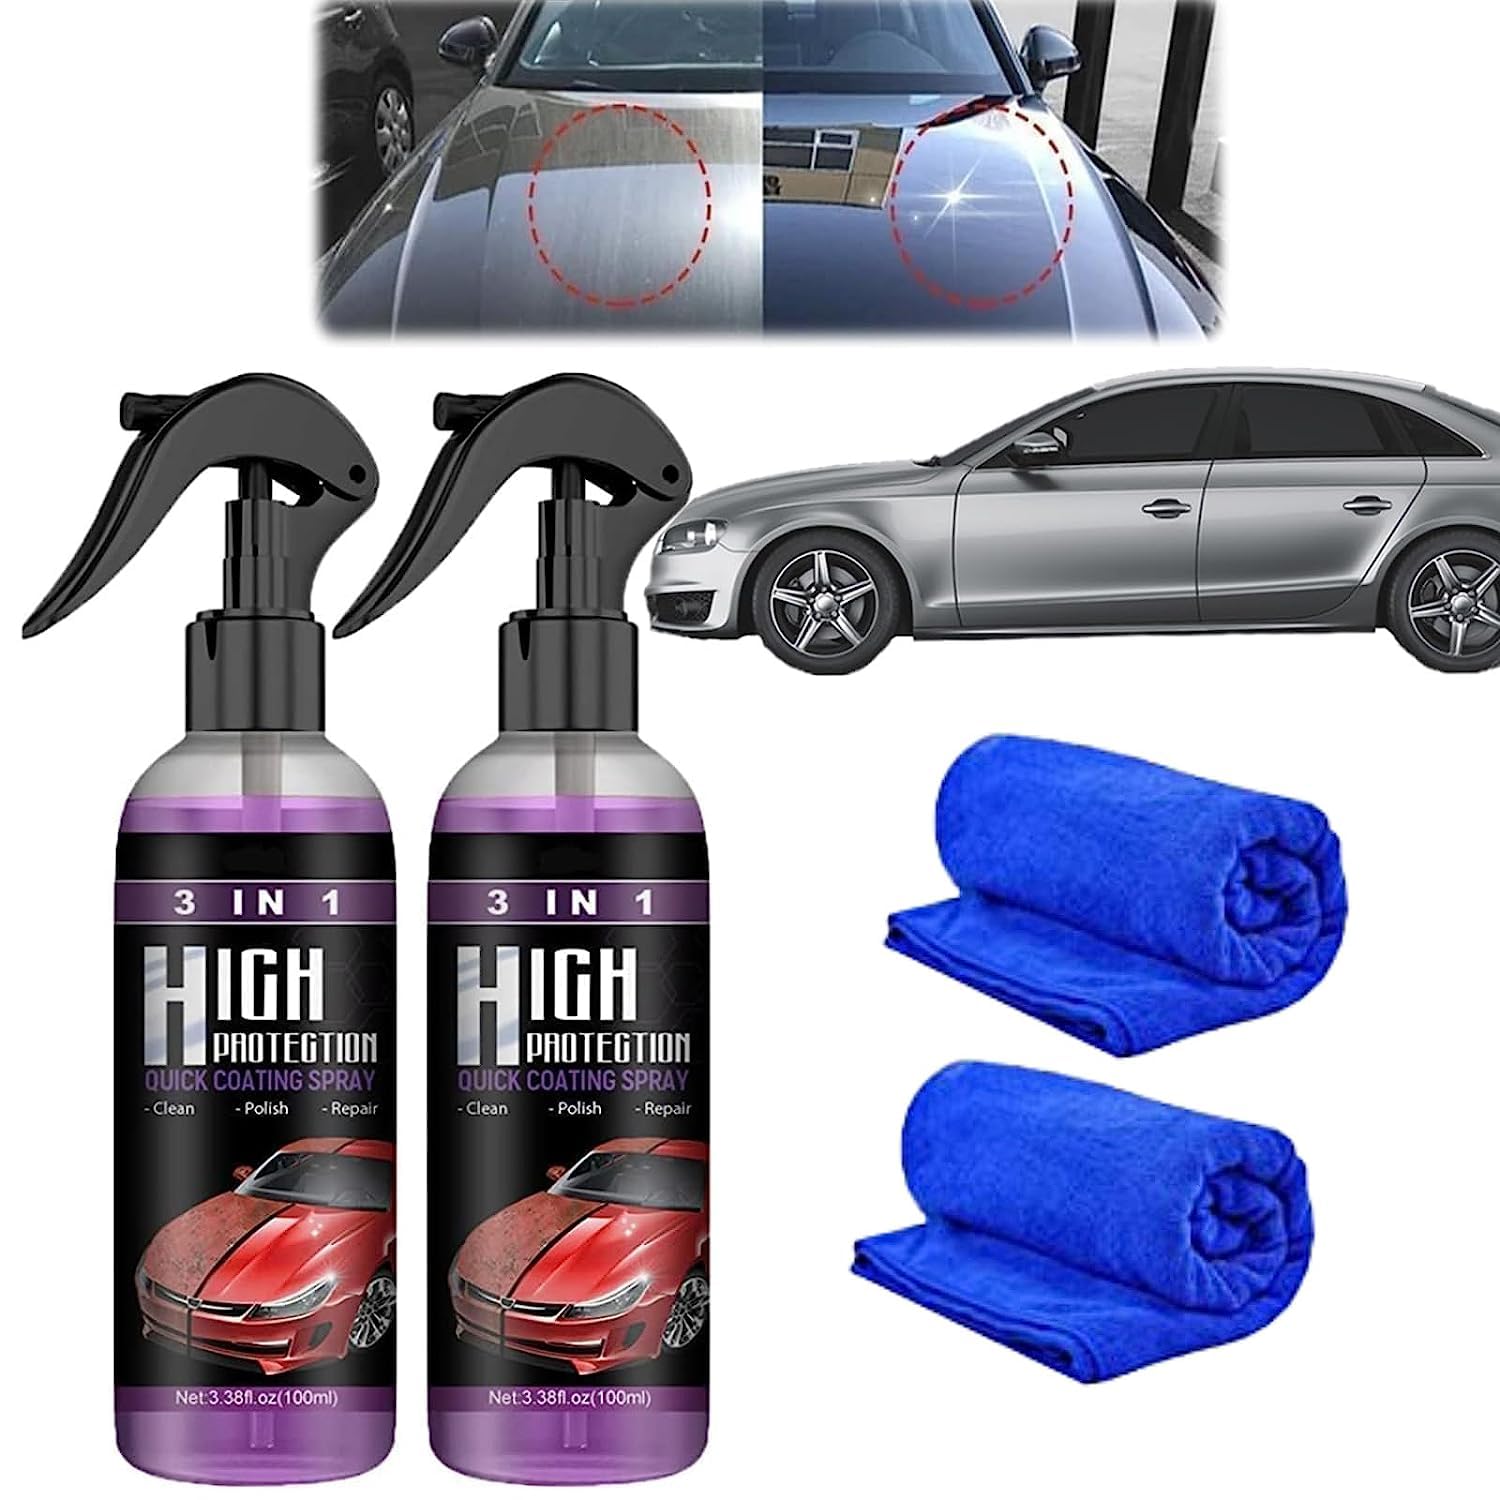 3 in 1 High Protection Car Quick Coating Spray, 3 in 1 [...]